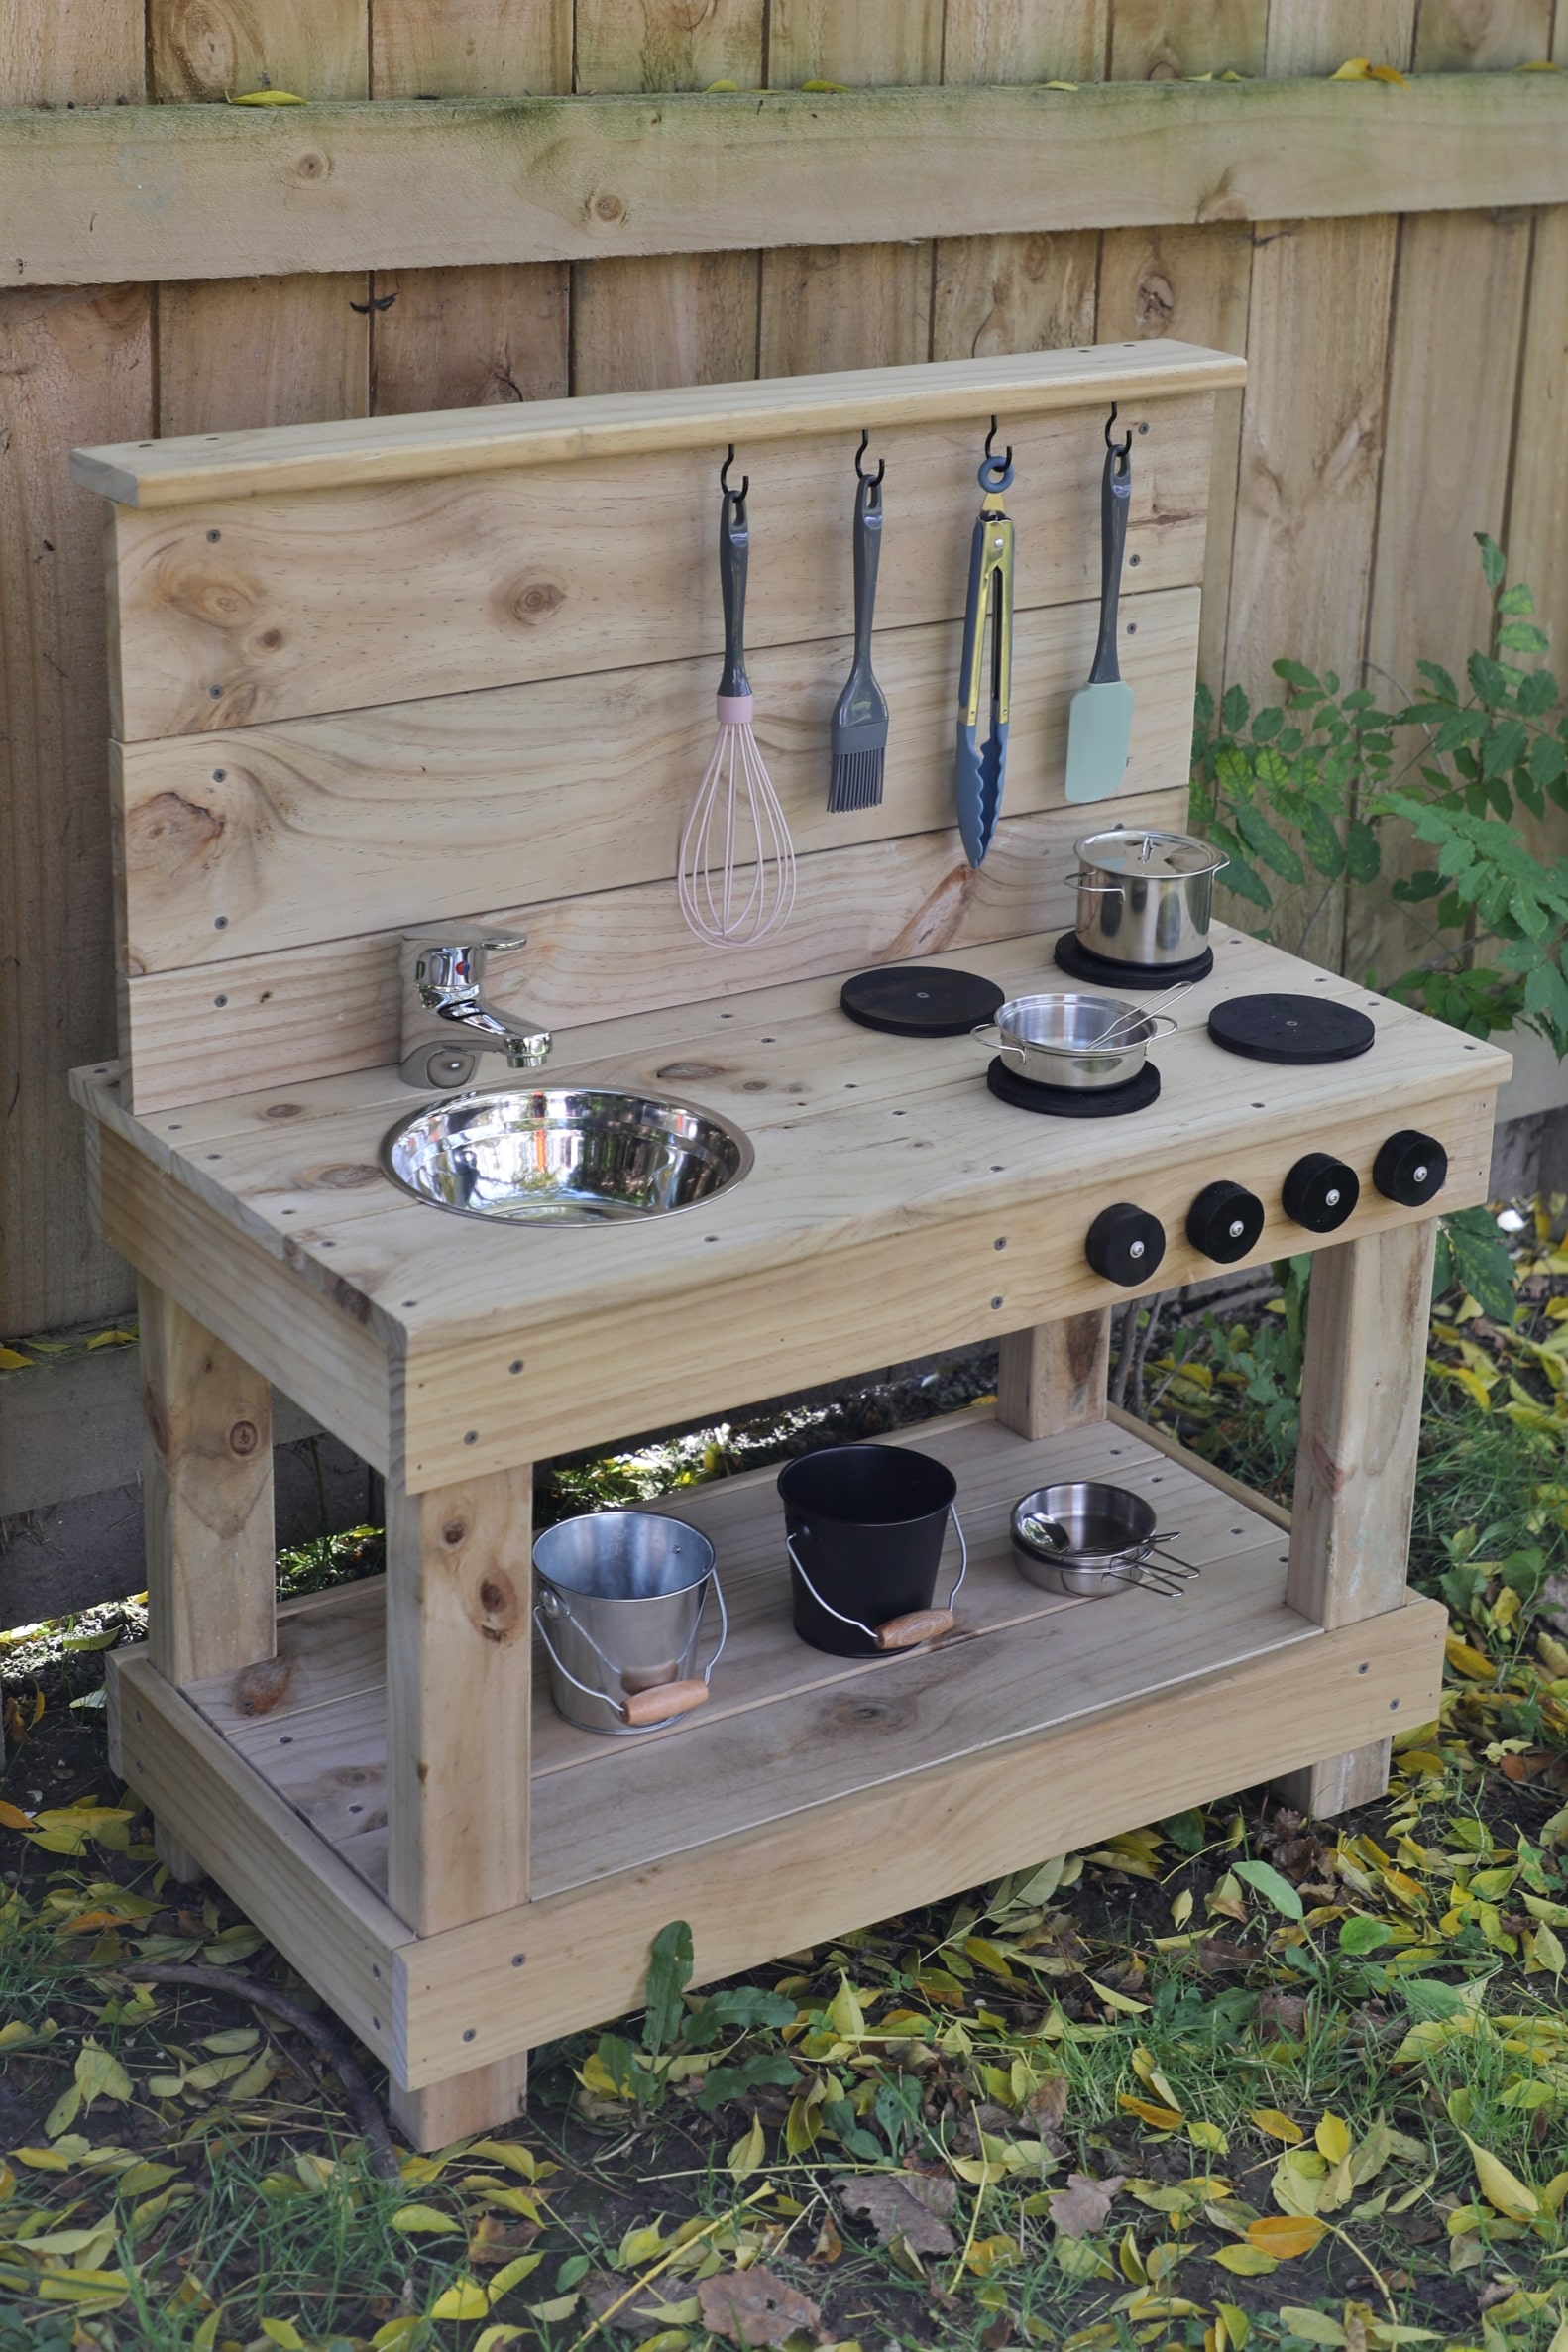 Kids Outdoor Play - Mud Kitchen by Hammer and Saw